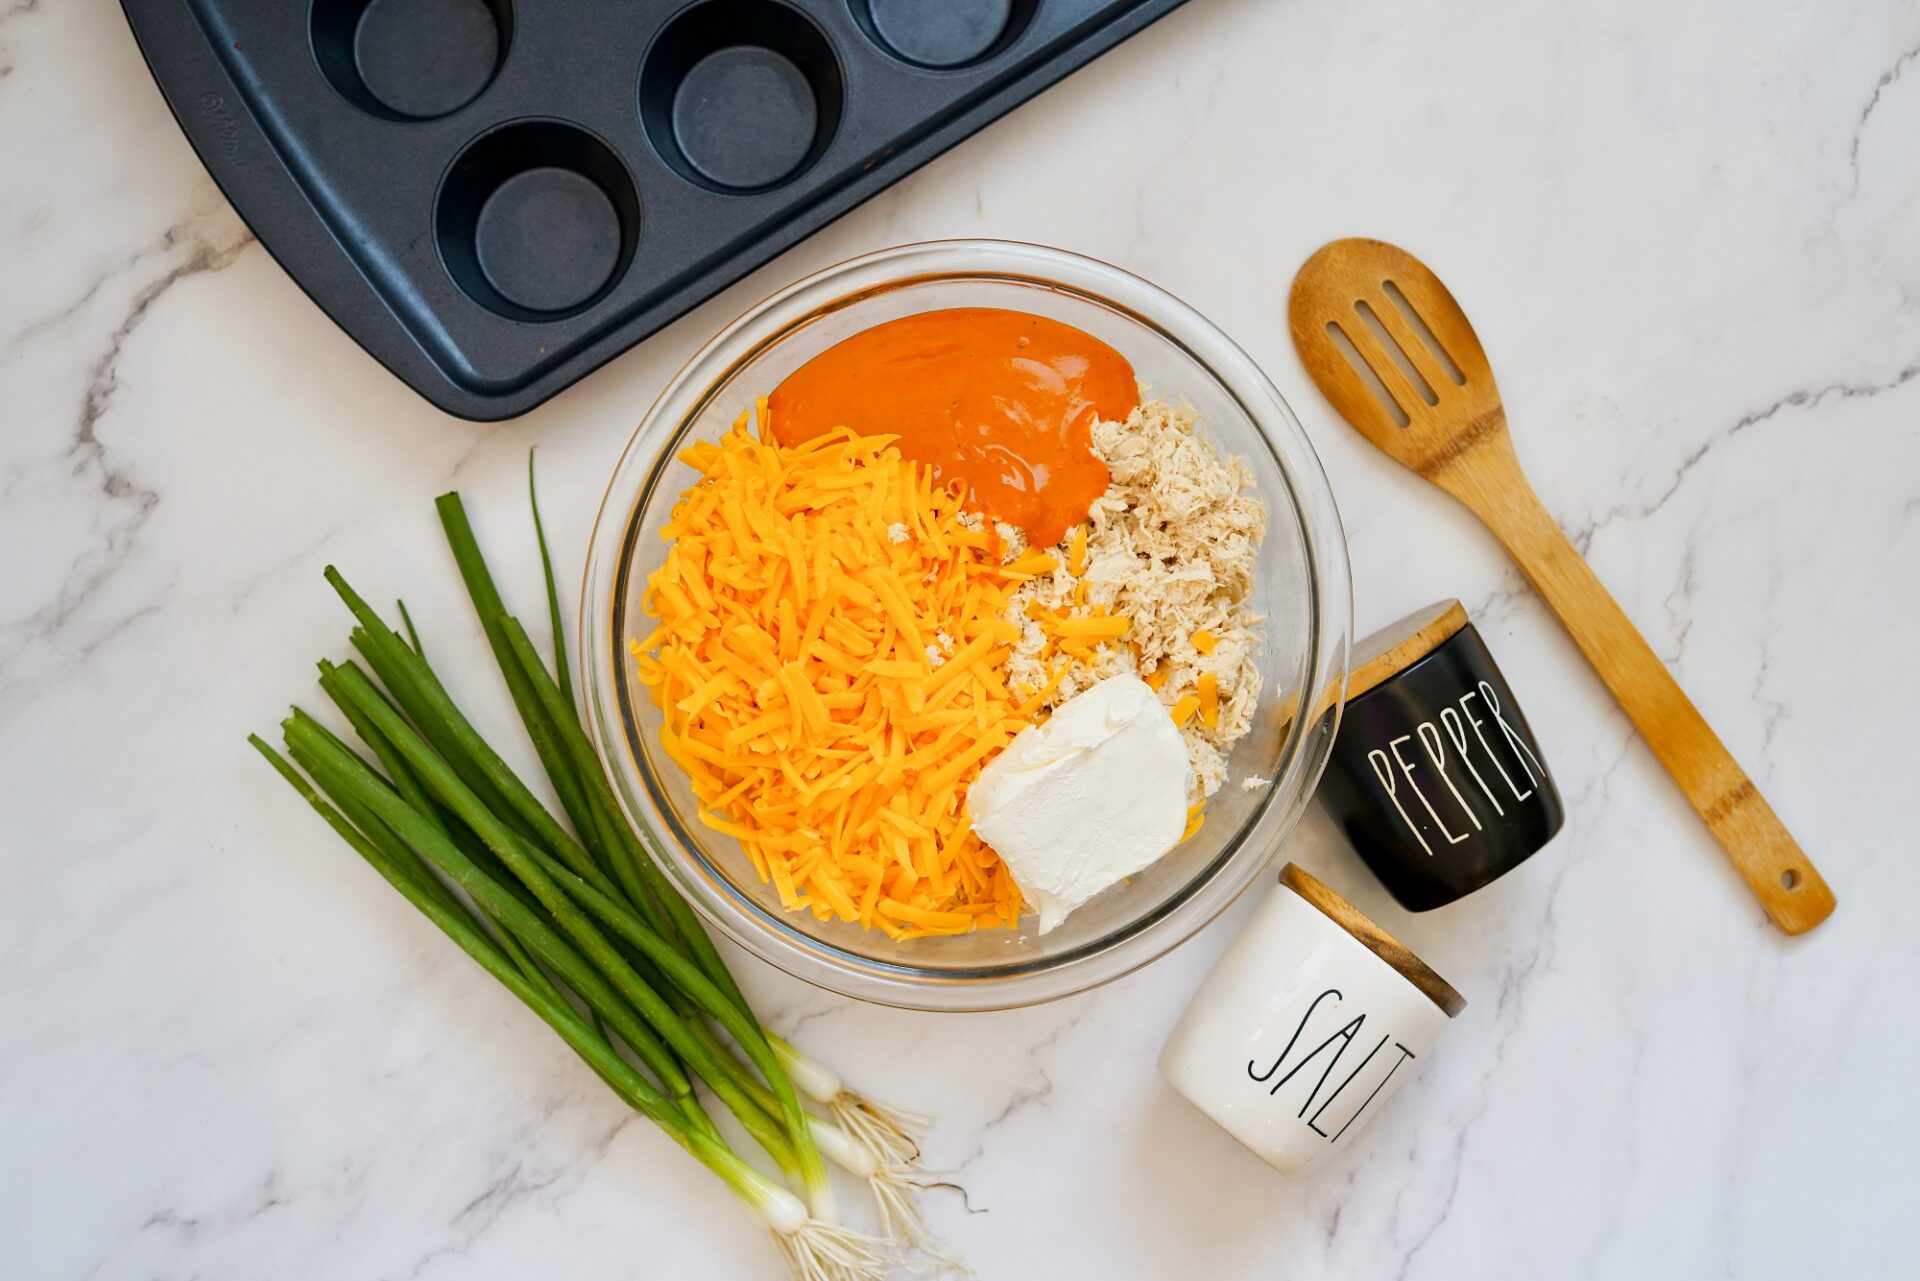 Combining ingredients for buffalo chicken filling.